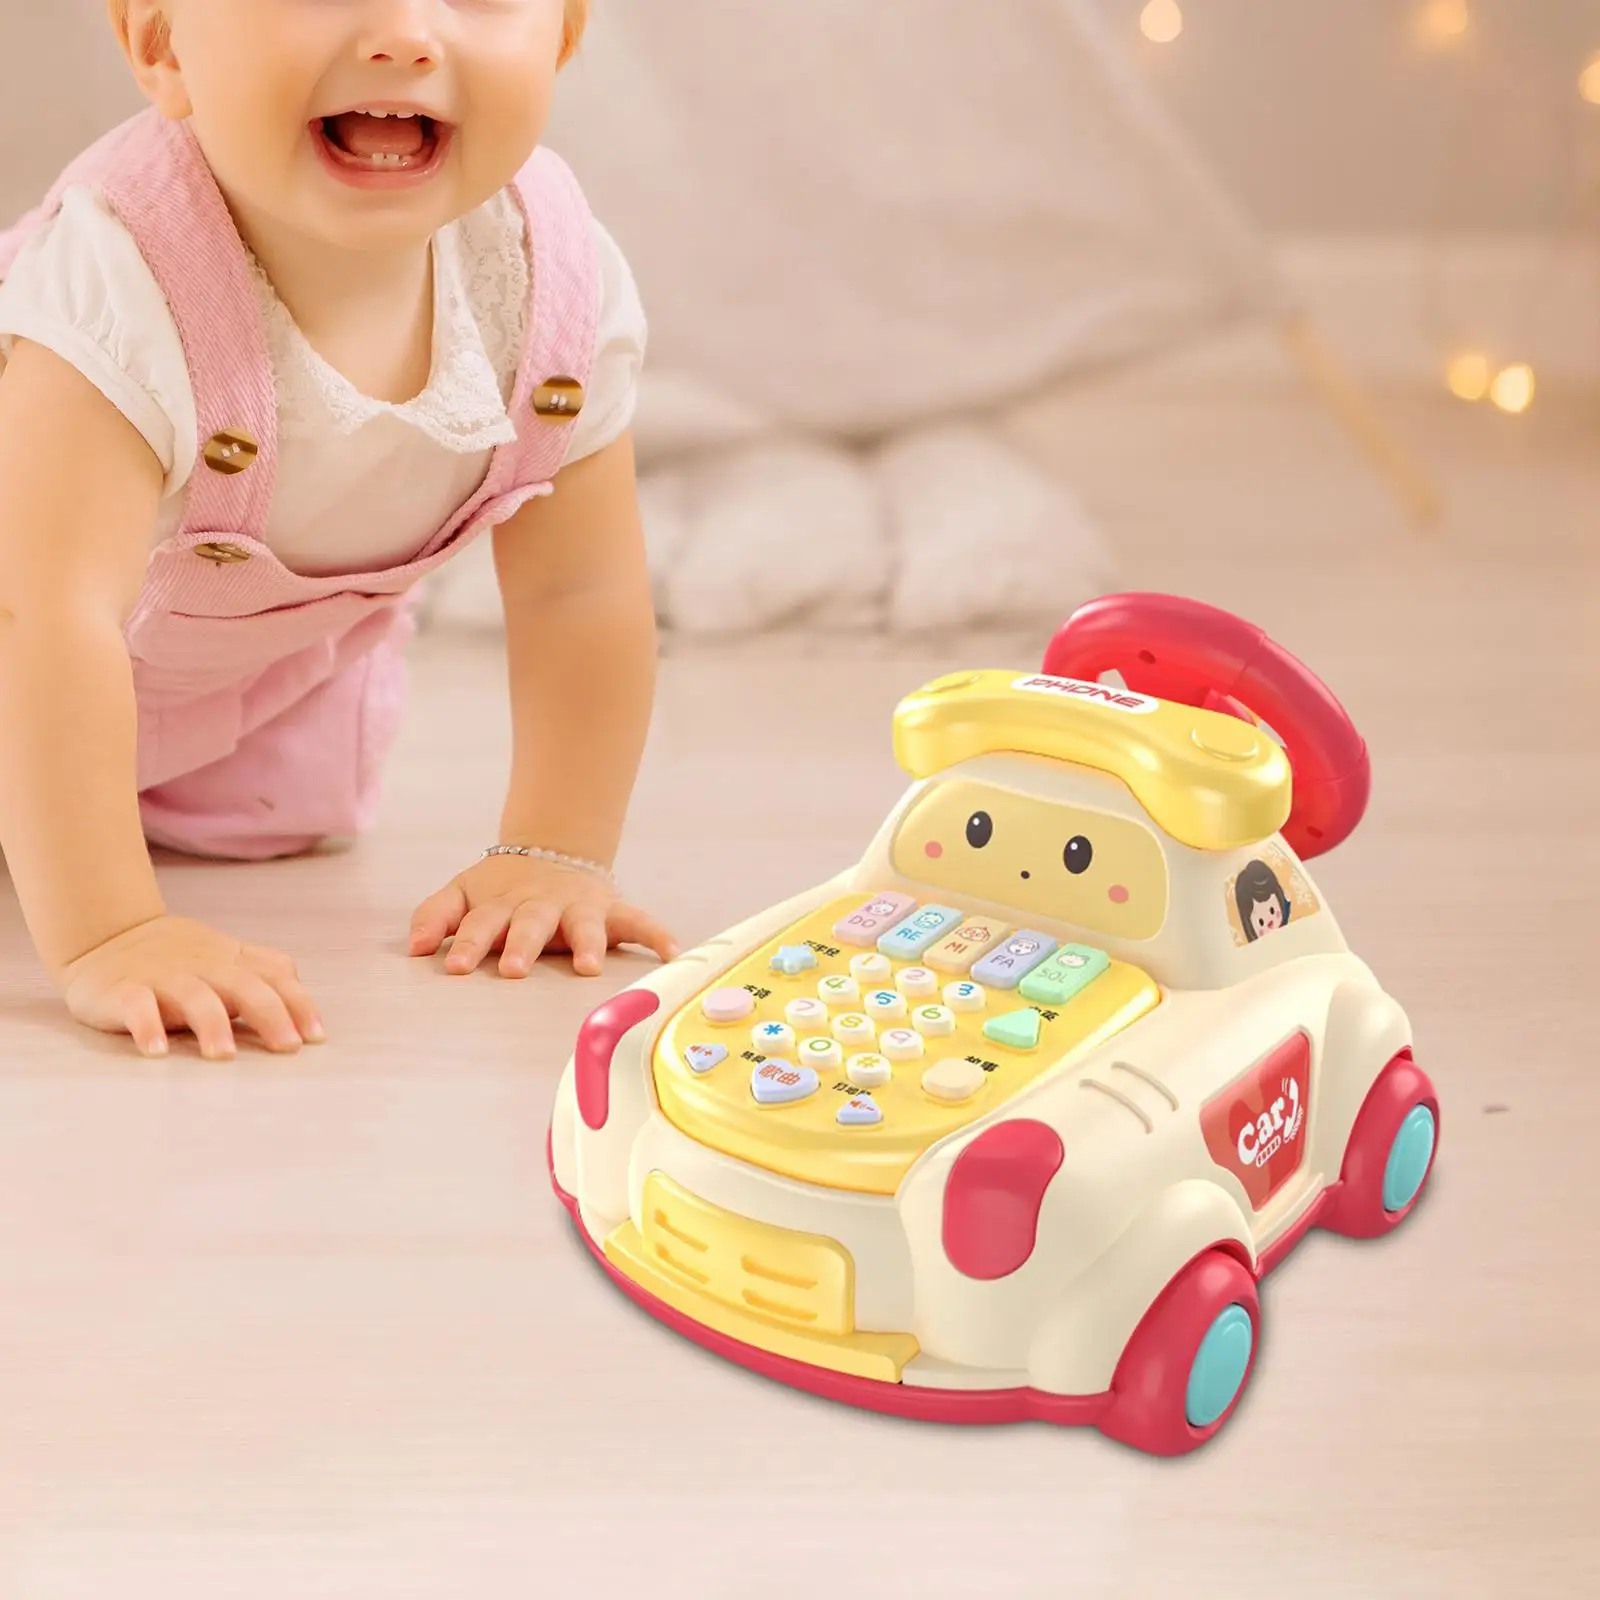 Baby Musical Toys Car Pretend Play musical toddlers Steering Wheel Car for Game Preschool Interaction Learning Development